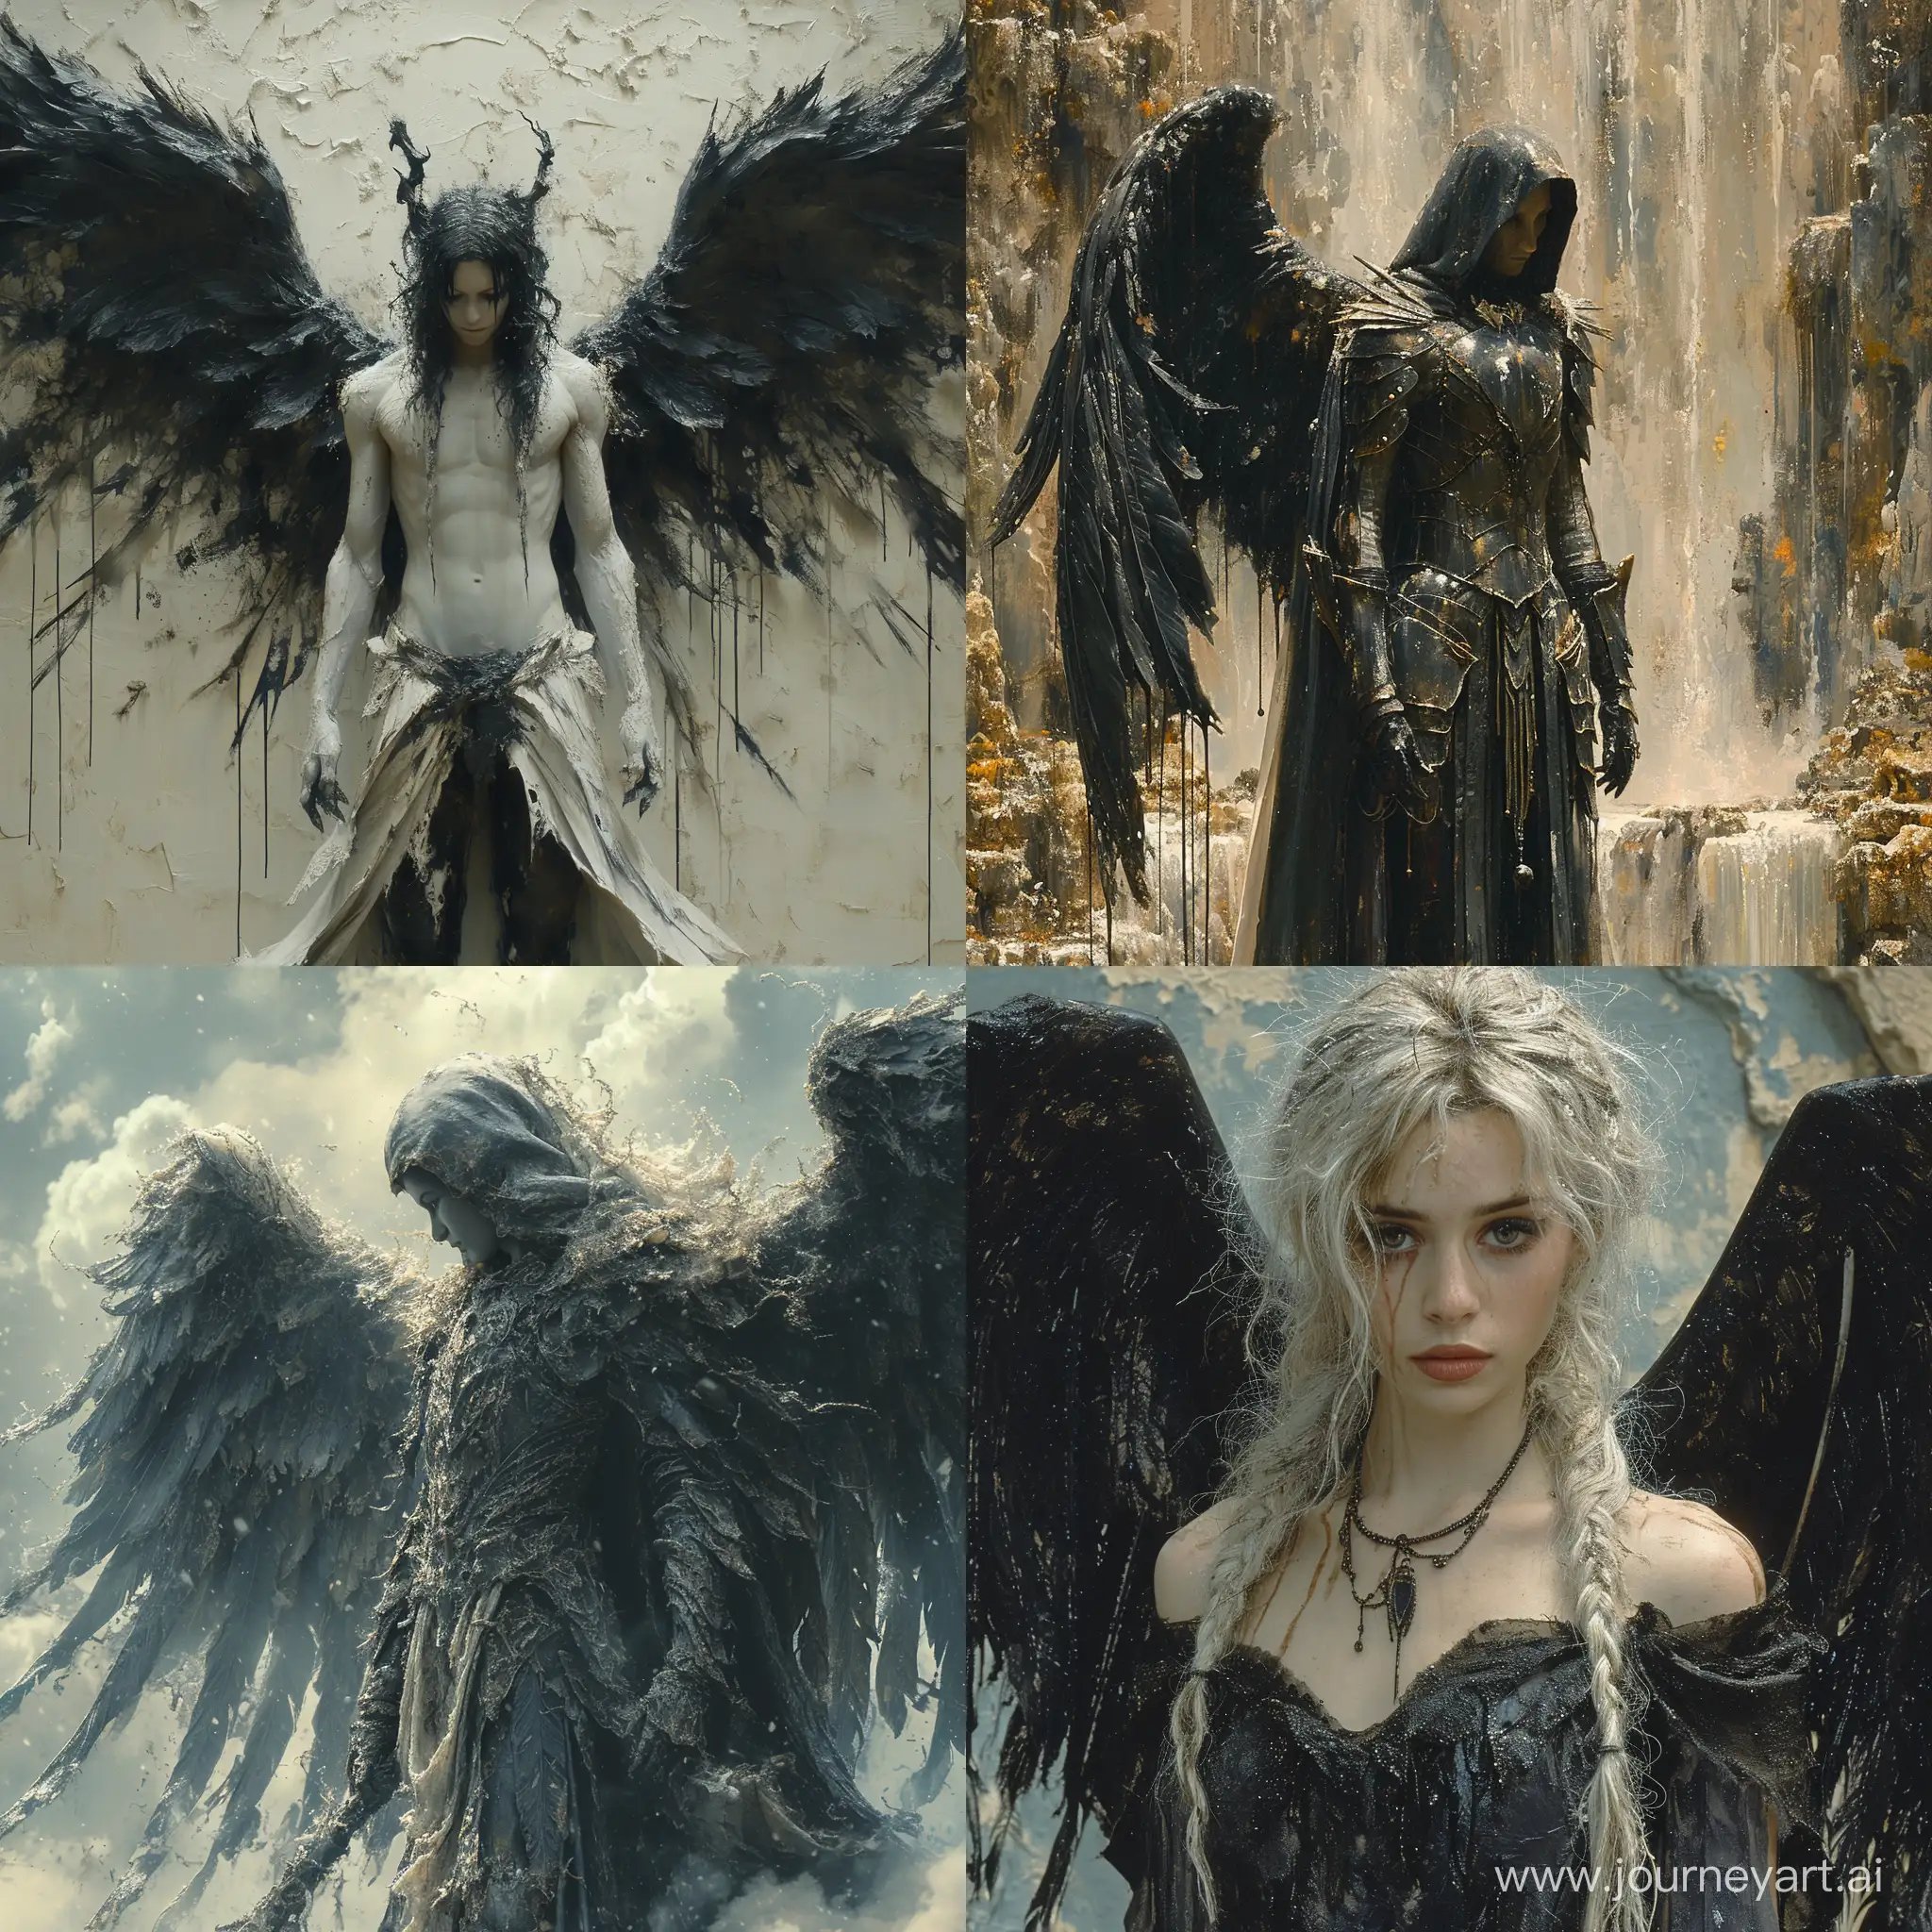 Diorama::1.5, dark angel with large black wings, standing in front of a sky background with white and blue hues, the angel has white hair and is wearing a armor-like outfit, the wings are spread out and there are black paint drips trailing from them, --s 1000 --quality 2